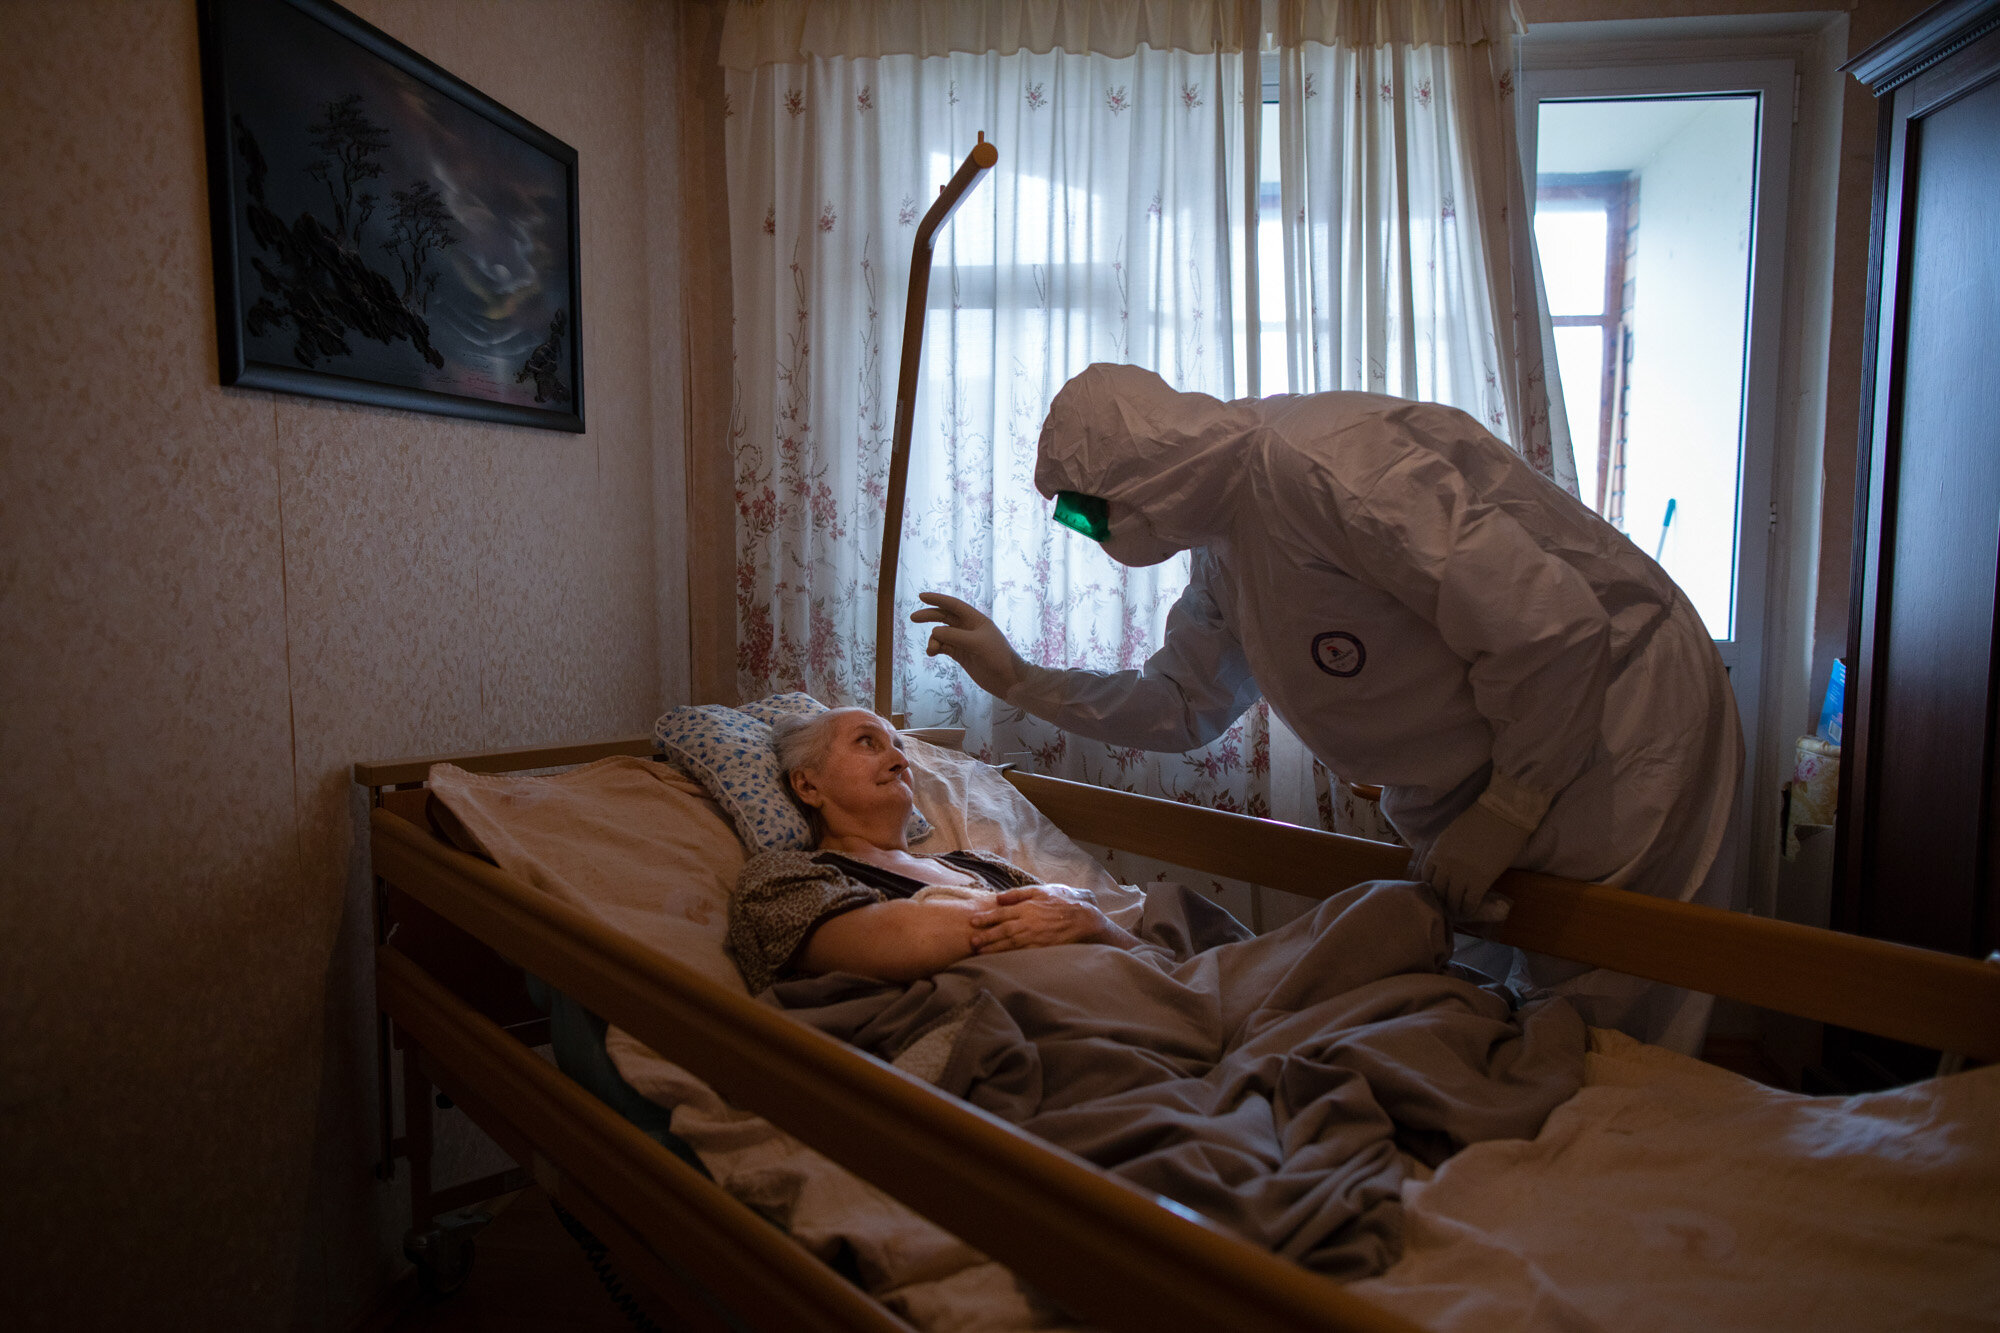  Father Vasily Gelevan, a Russian Orthodox priest, blesses Lyudmila Polyak, 86, who is believed to be suffering from COVID-19, at her apartment in Moscow. (AP Photo/Alexander Zemlianichenko) 